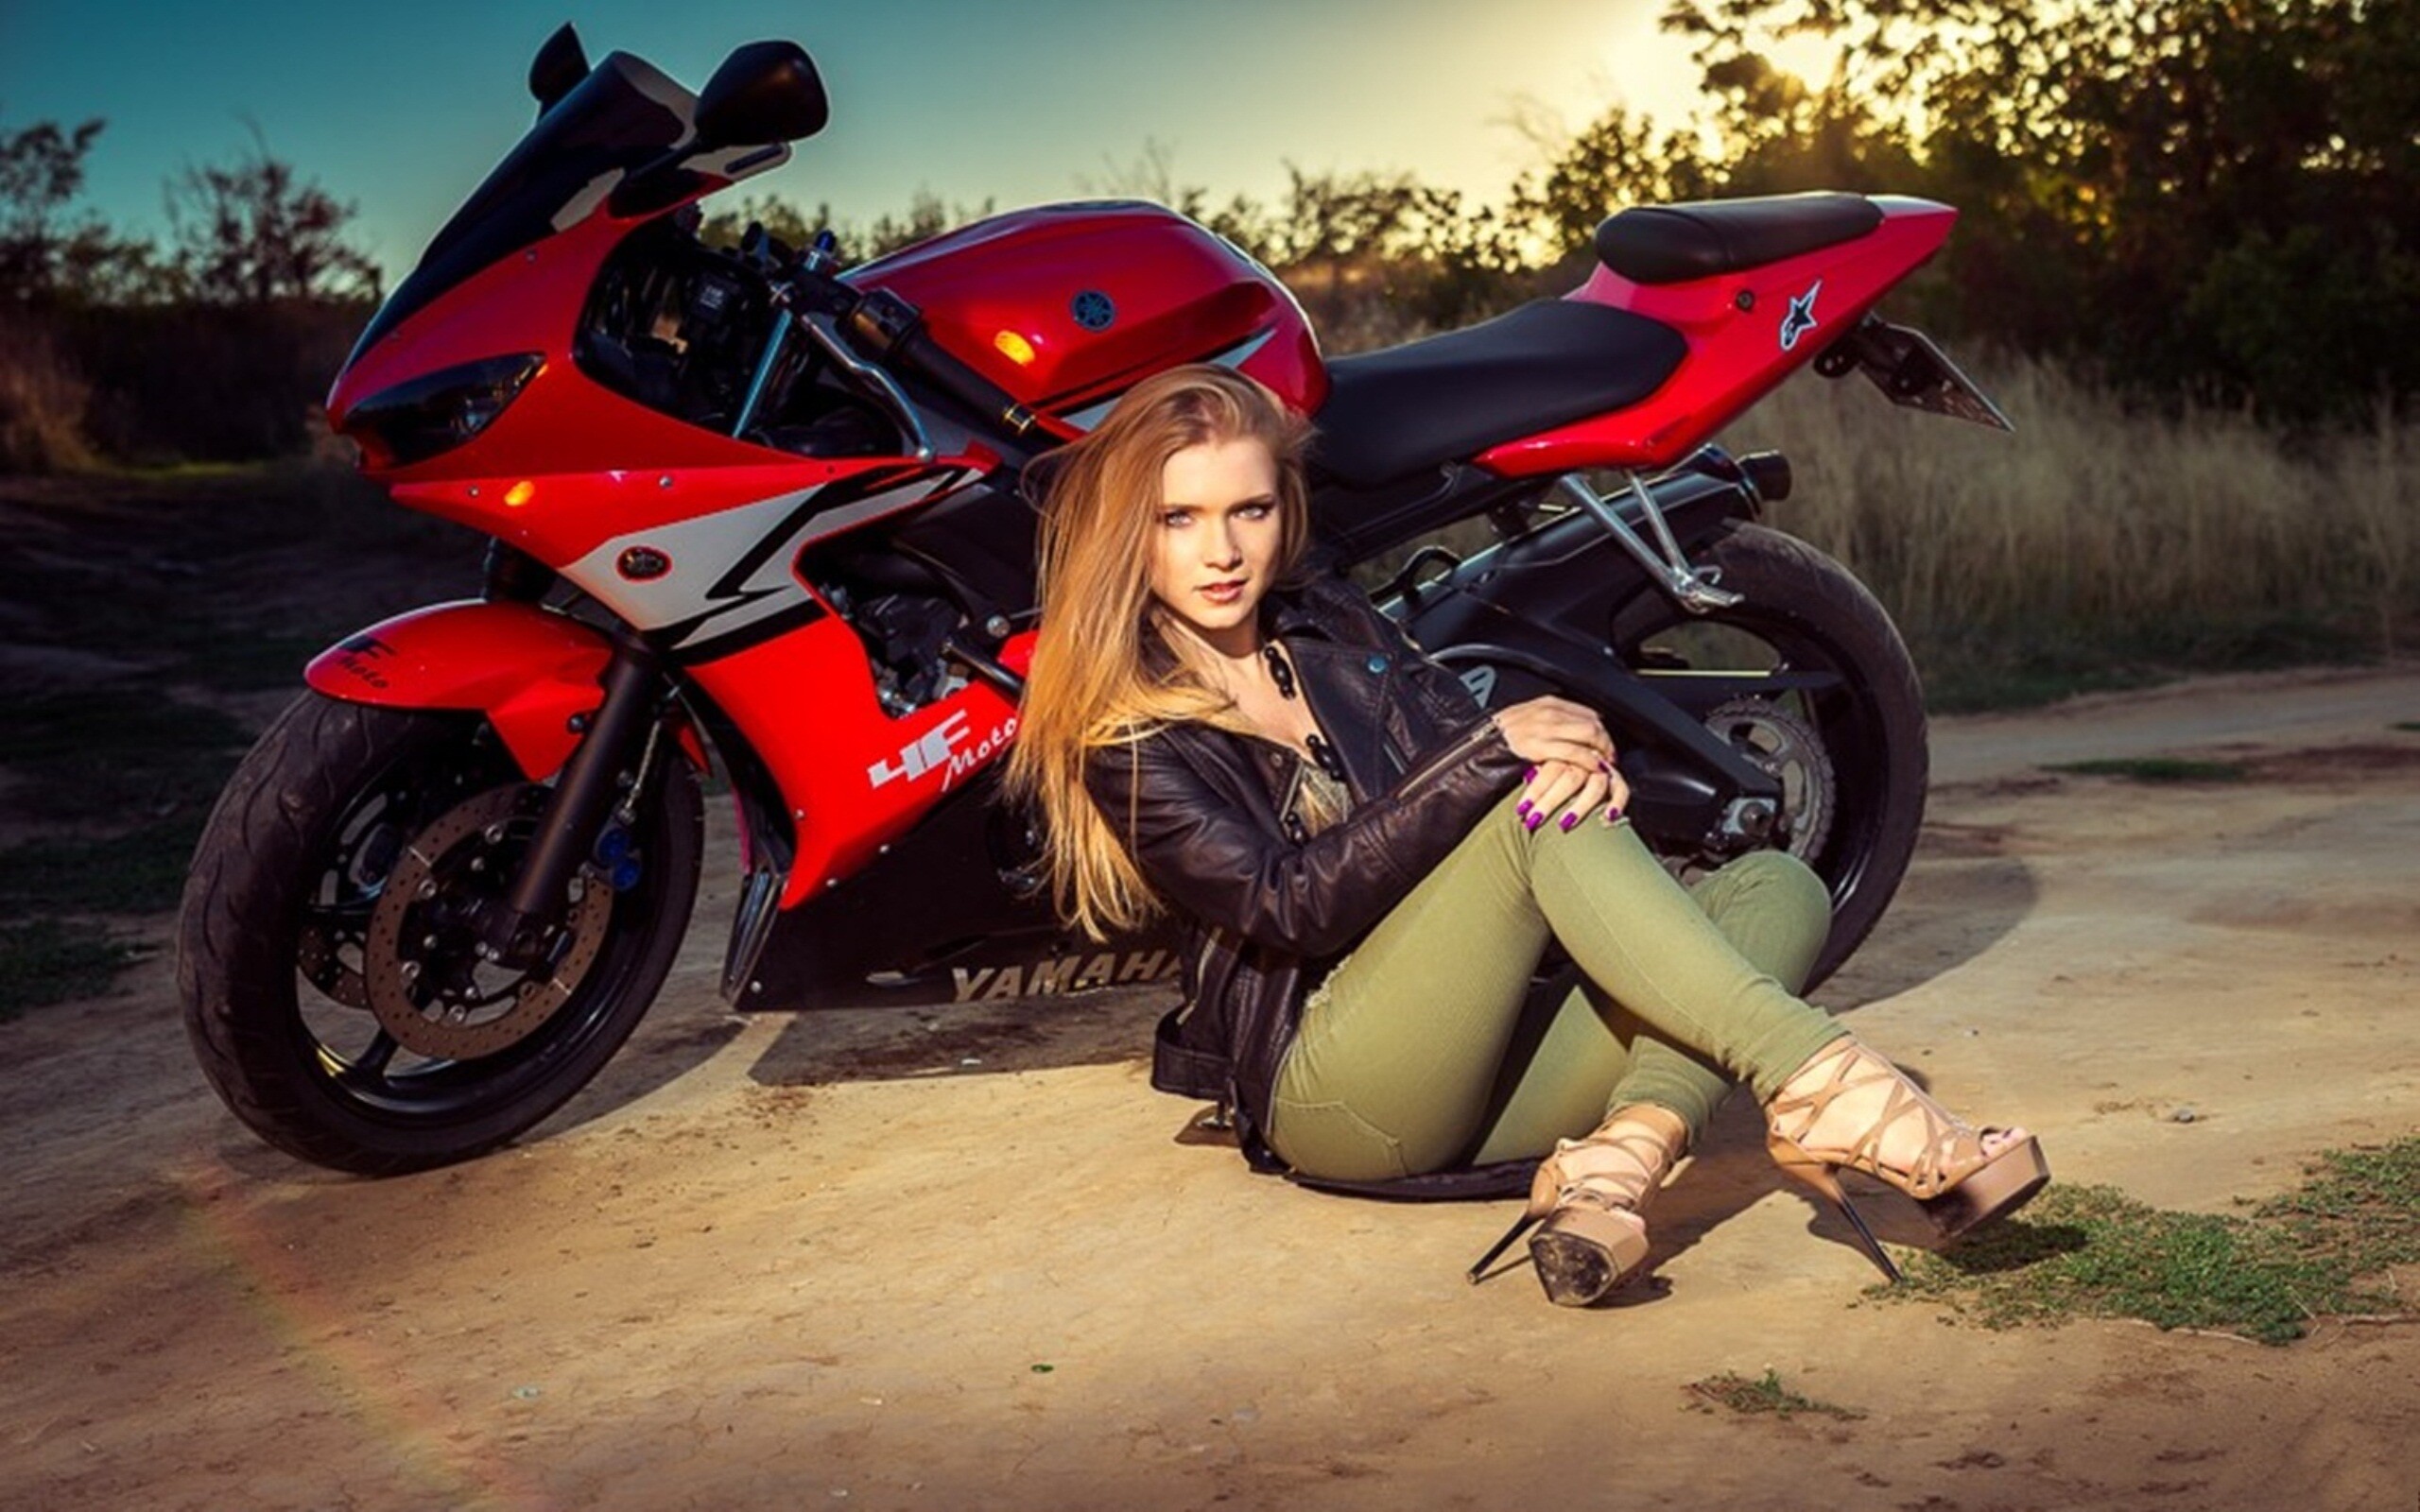 Girls and Motorcycles: Yamaha, Impressive technology, Full package, Chassis, Suspension, A sunset motorbike ride. 2560x1600 HD Wallpaper.